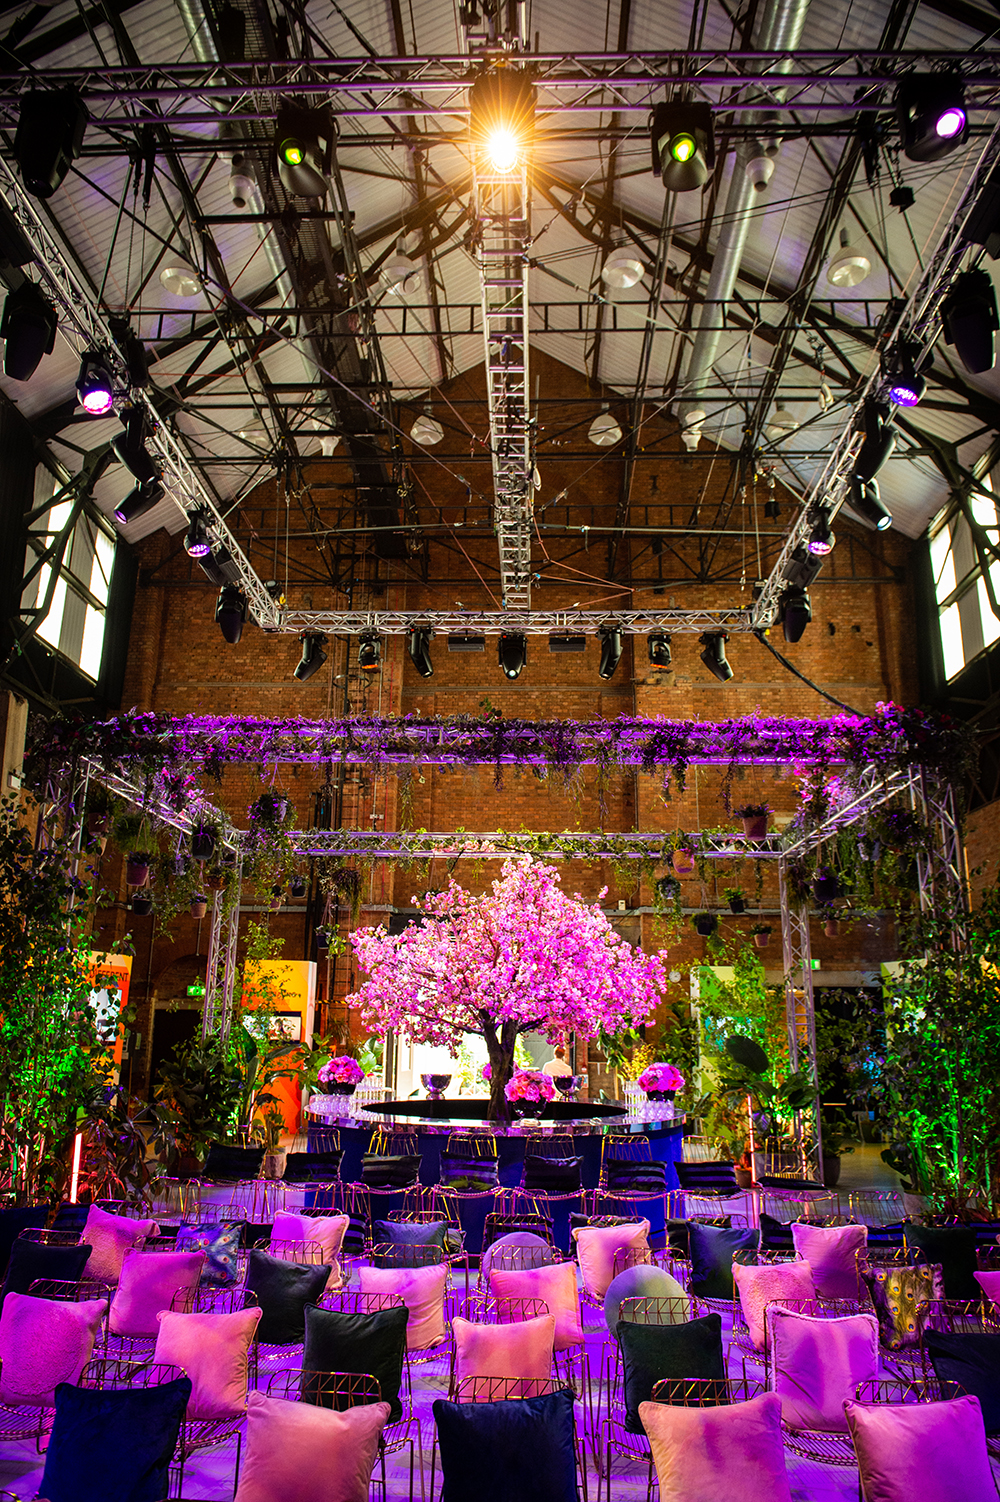 Large industrial space filled with artificial foliage for an event